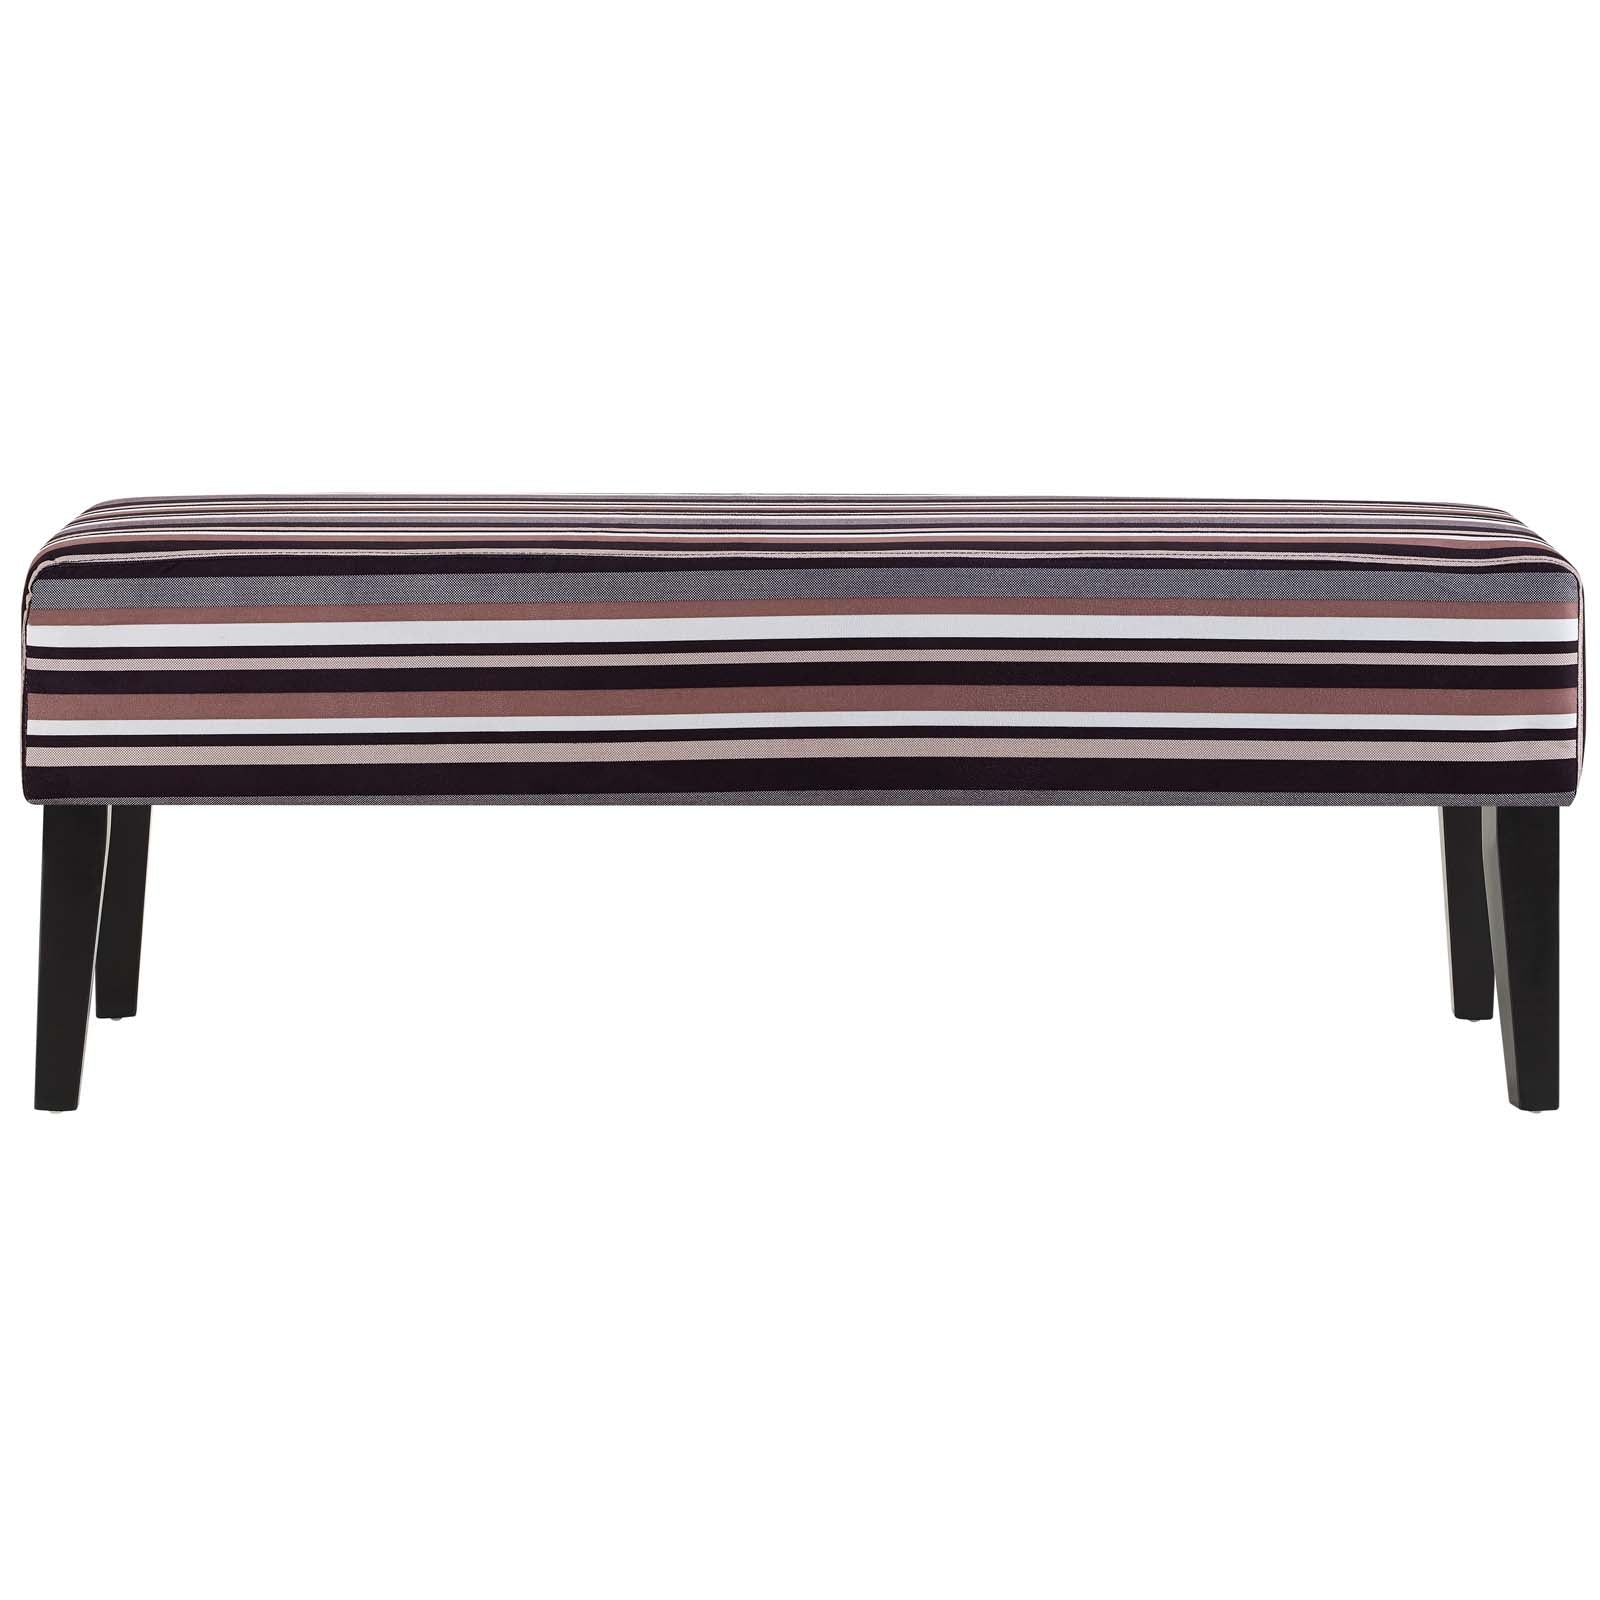 Connect Upholstered Fabric Bench - East Shore Modern Home Furnishings